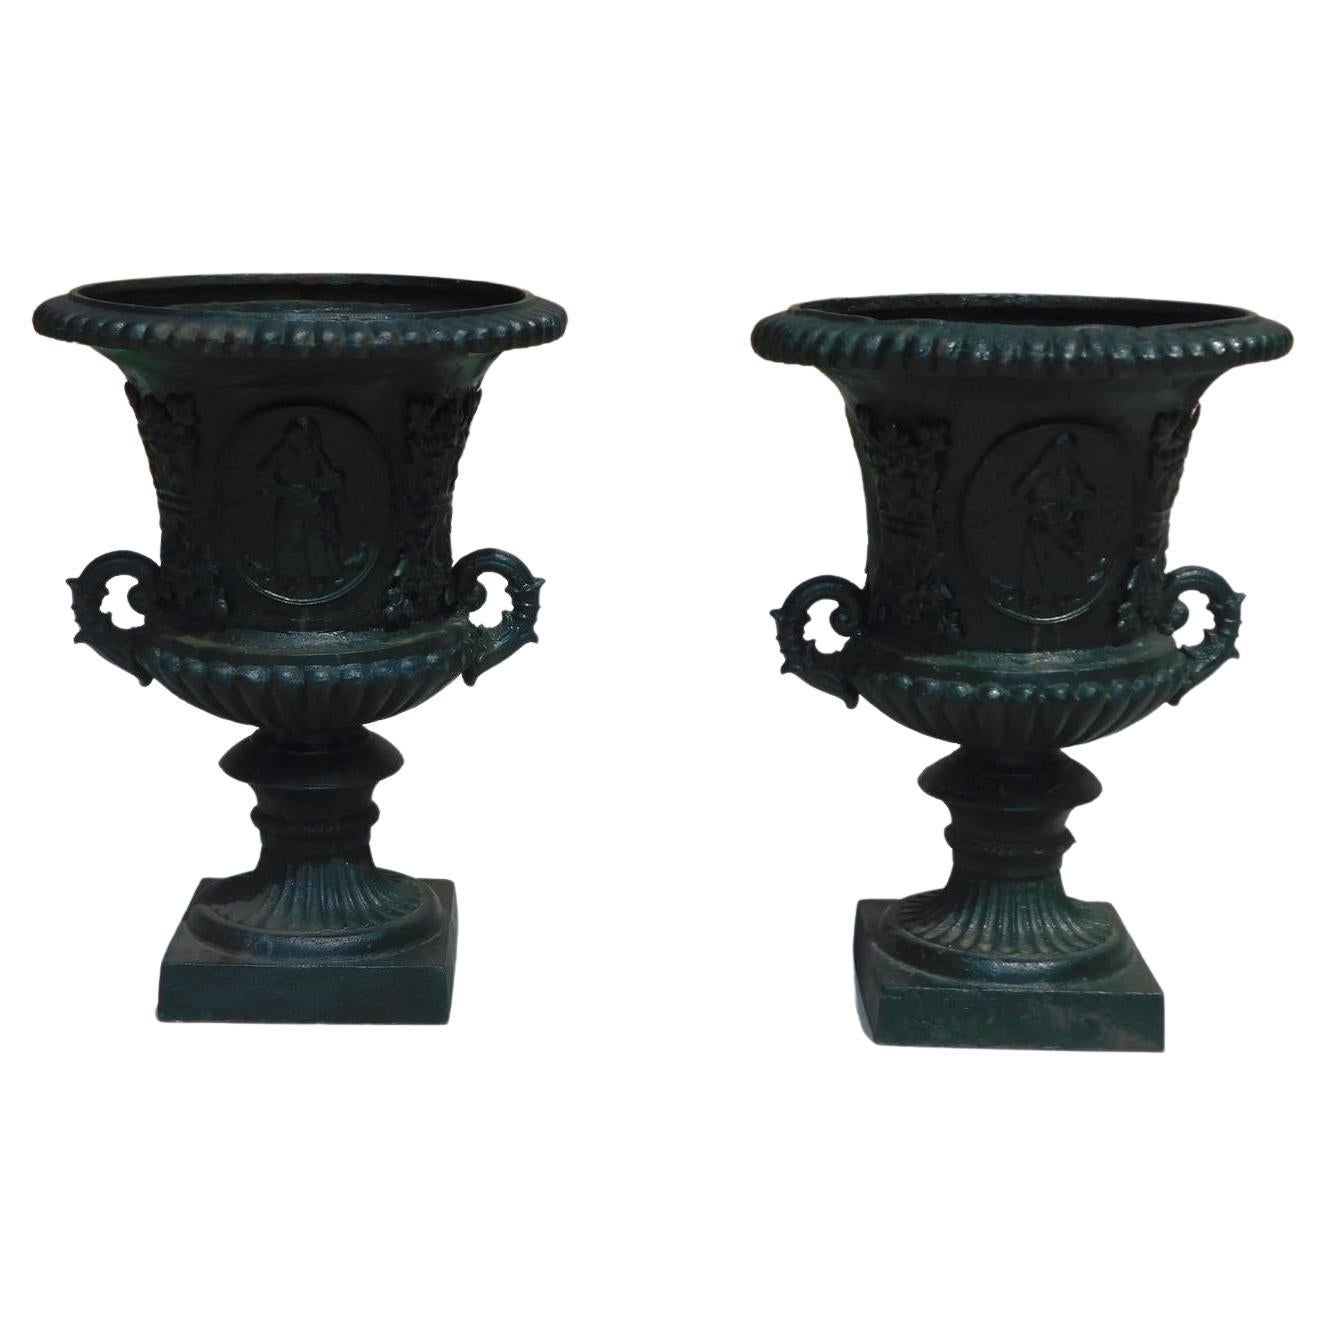 Pair of American Classical Figural & Foliage Campana Form Garden Urns Circa 1850 For Sale